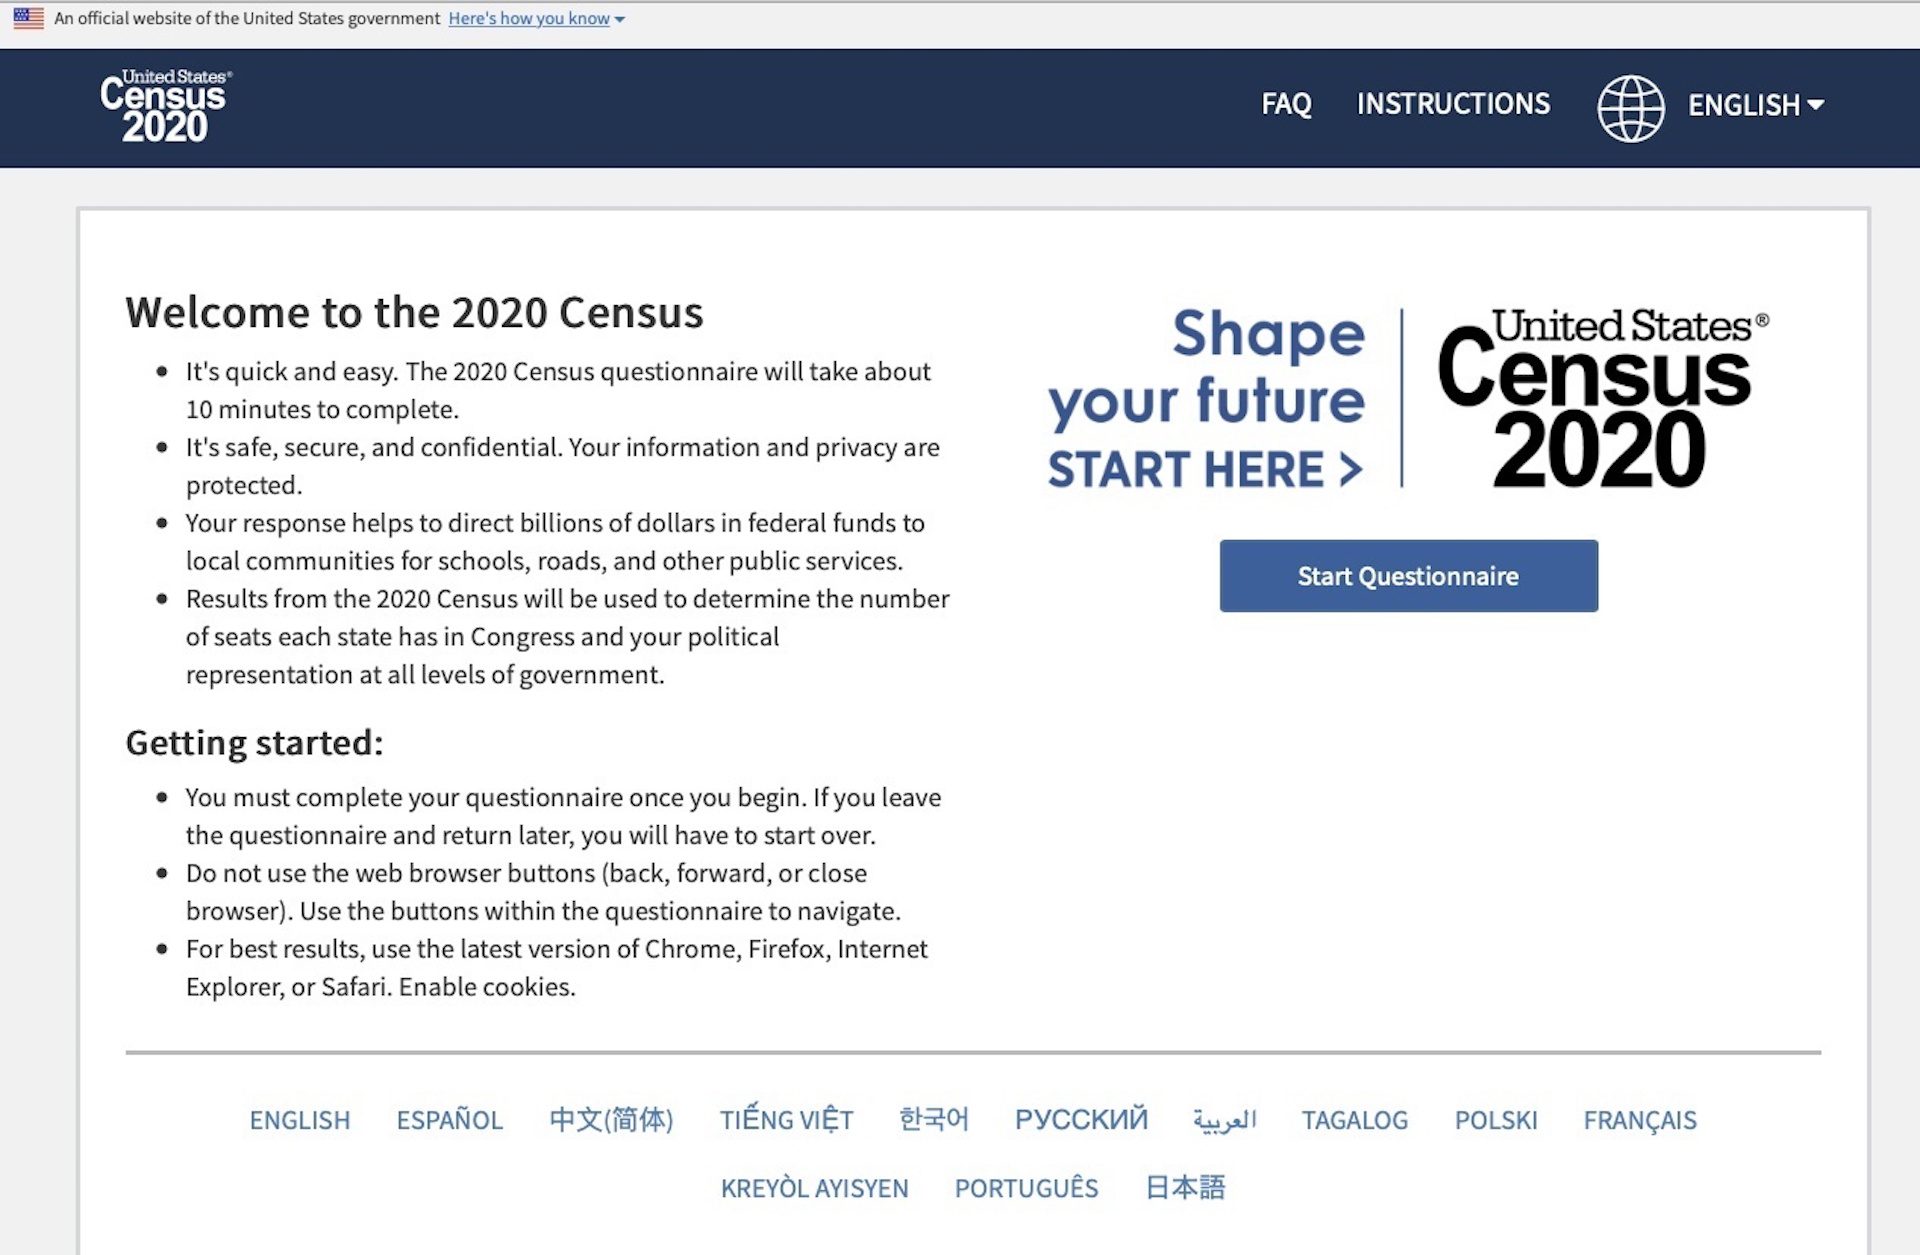 This photo provided by the U.S. Census 2020, shows the homepage of the United States' Census 2020 website on Tuesday, March 10, 2020. The 2020 census is off and running for much of America now. The U.S. Census Bureau made a soft launch of the 2020 census website on Monday, March 9 making its form available online. On Thursday, March 12 the Census Bureau will begin mailing out notices far and wide.